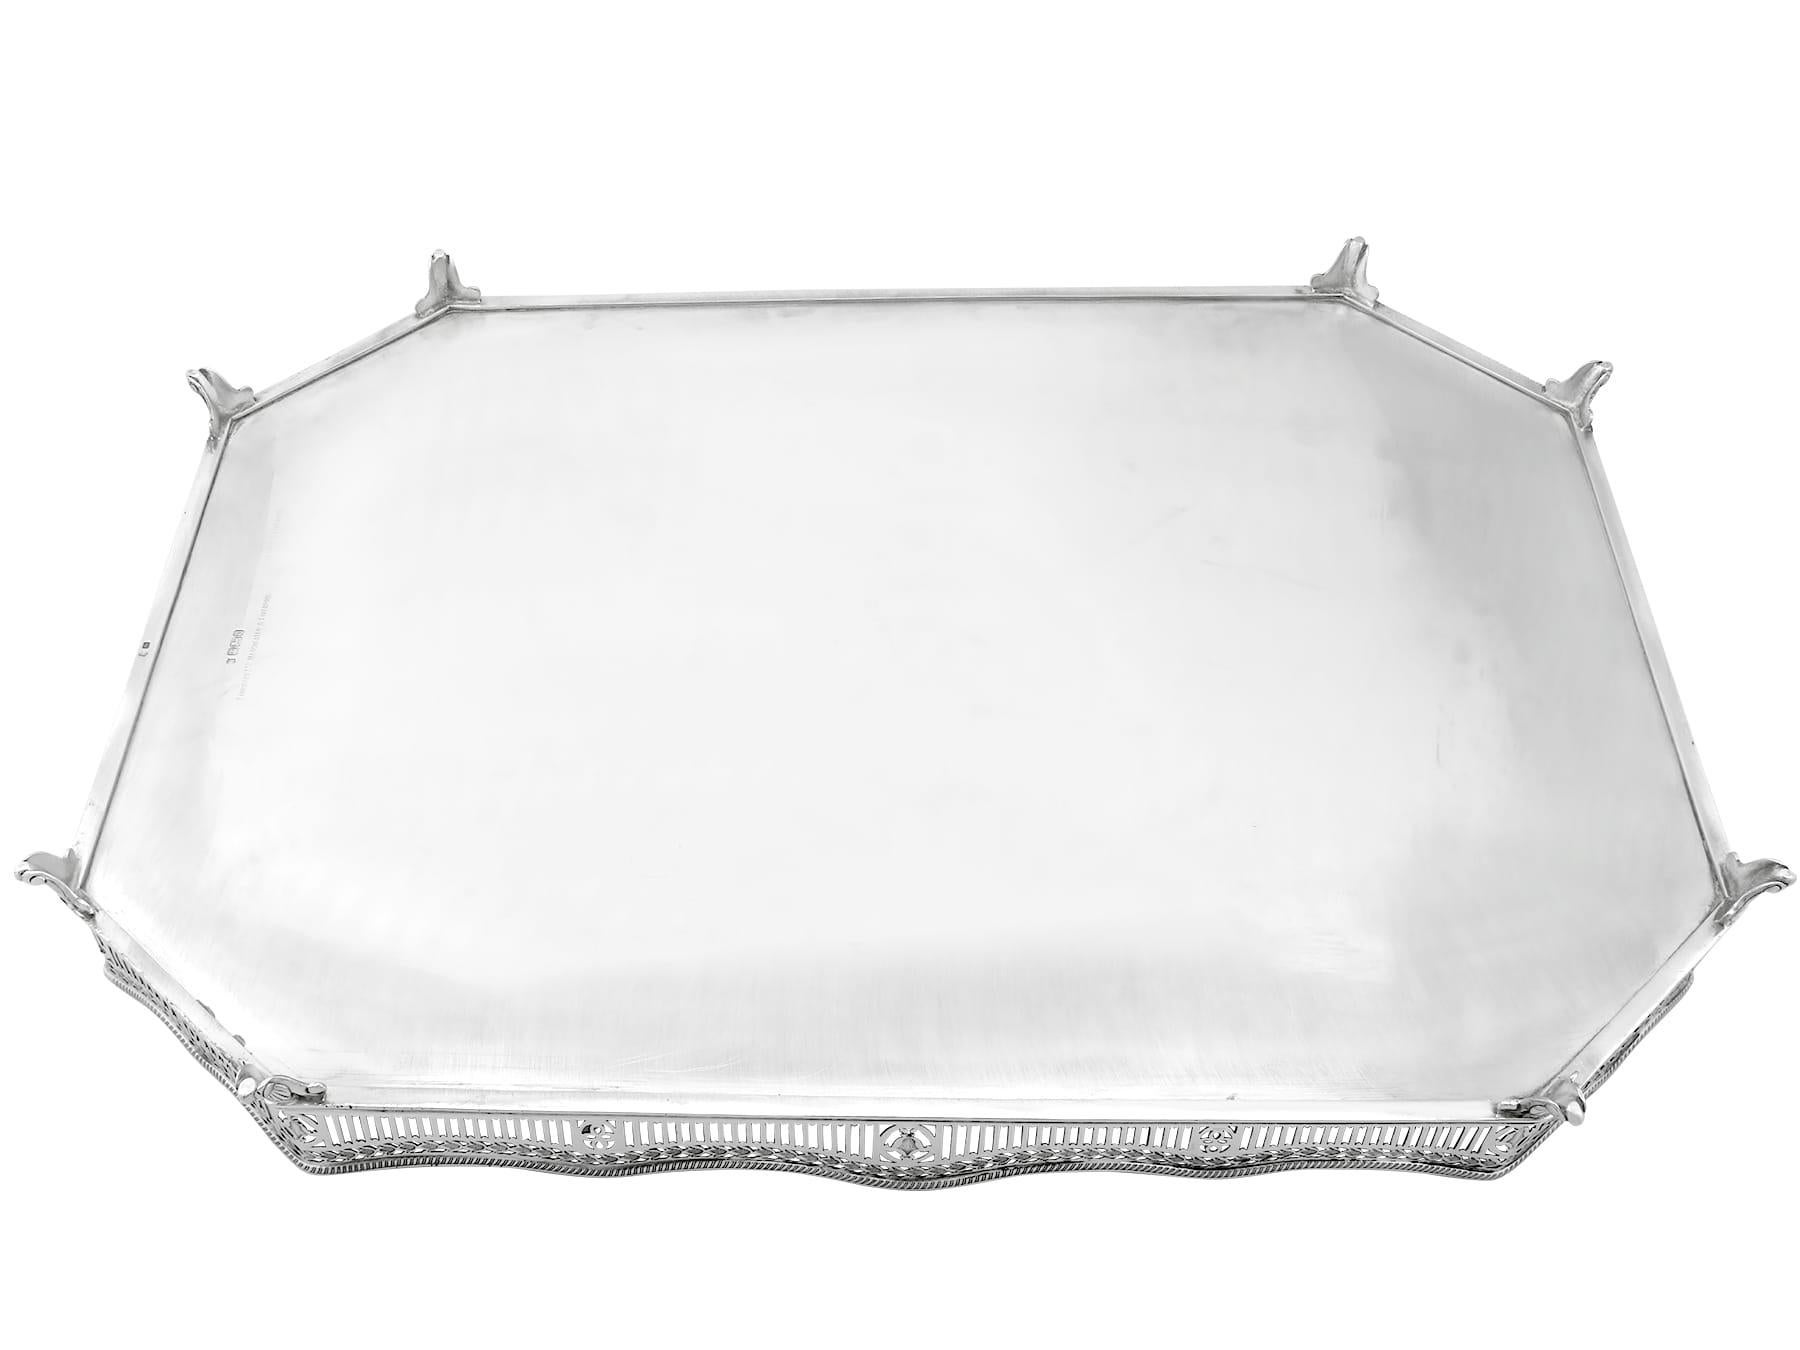 Sterling Silver Gallery Tea Tray - Antique Edwardian (1905) In Excellent Condition For Sale In Jesmond, Newcastle Upon Tyne